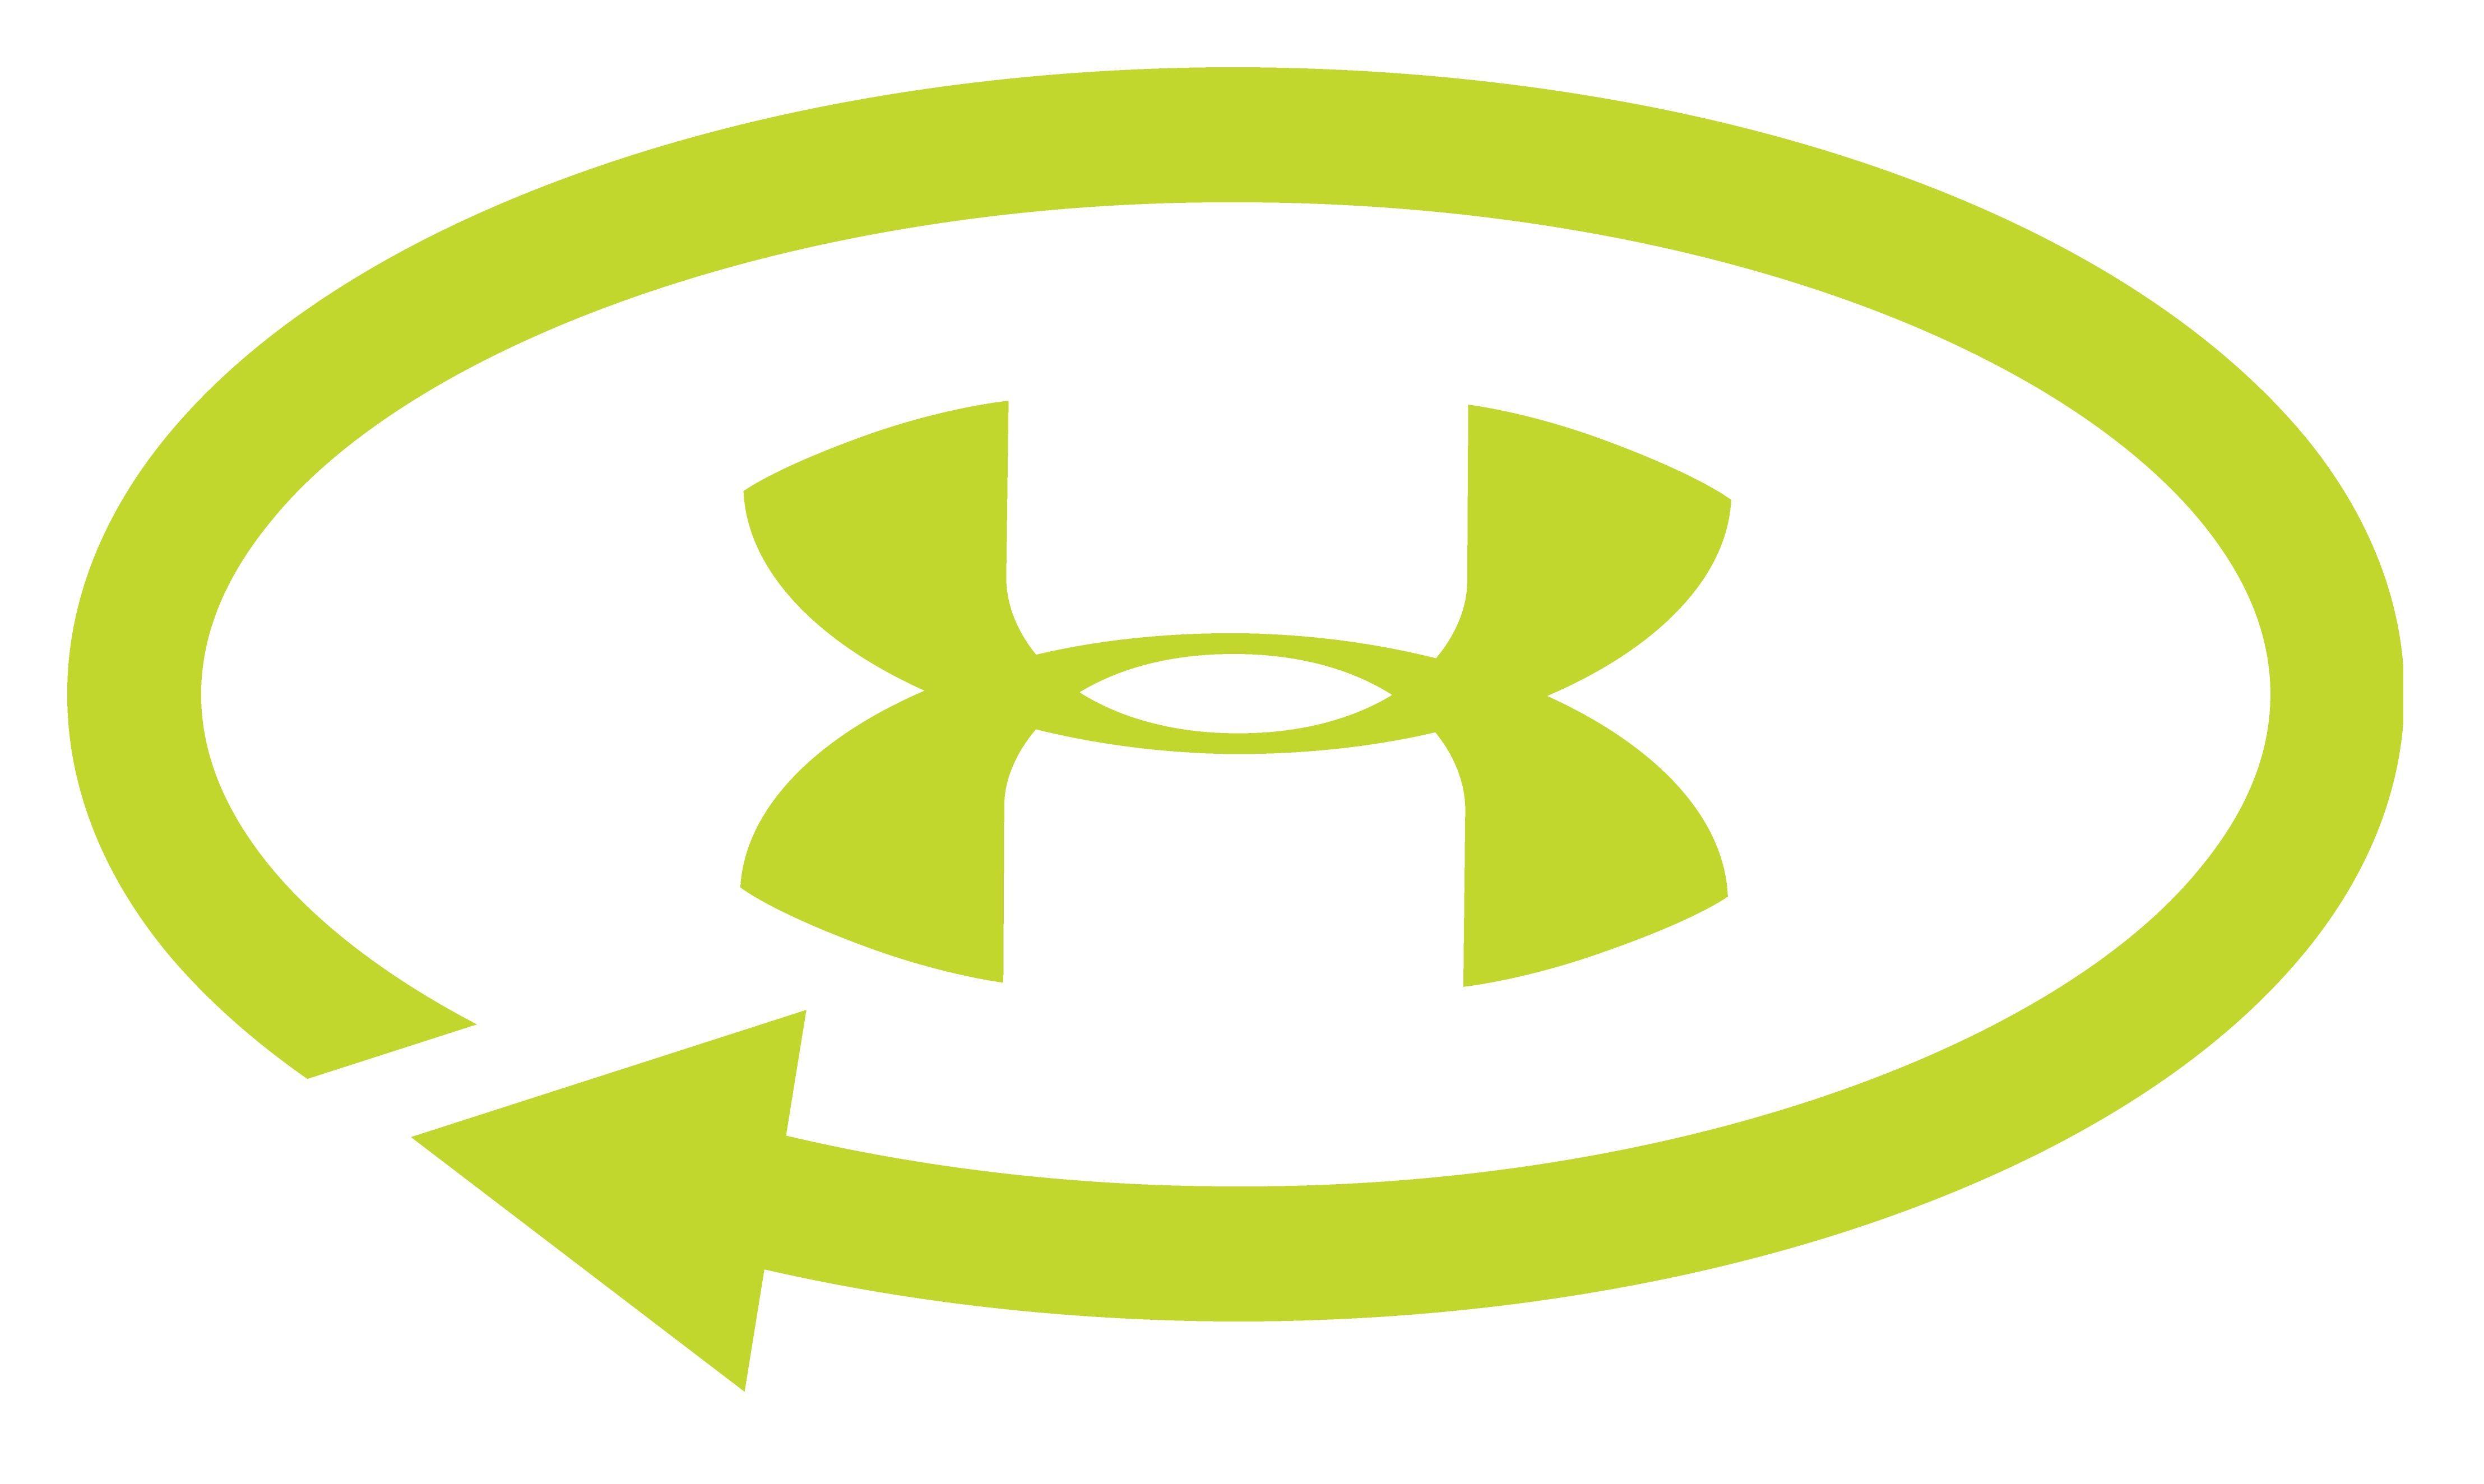 Cool Under Armour Green Logo - Cool Under Armour Wallpapers 13 of 40 with Green Line Logo for ...